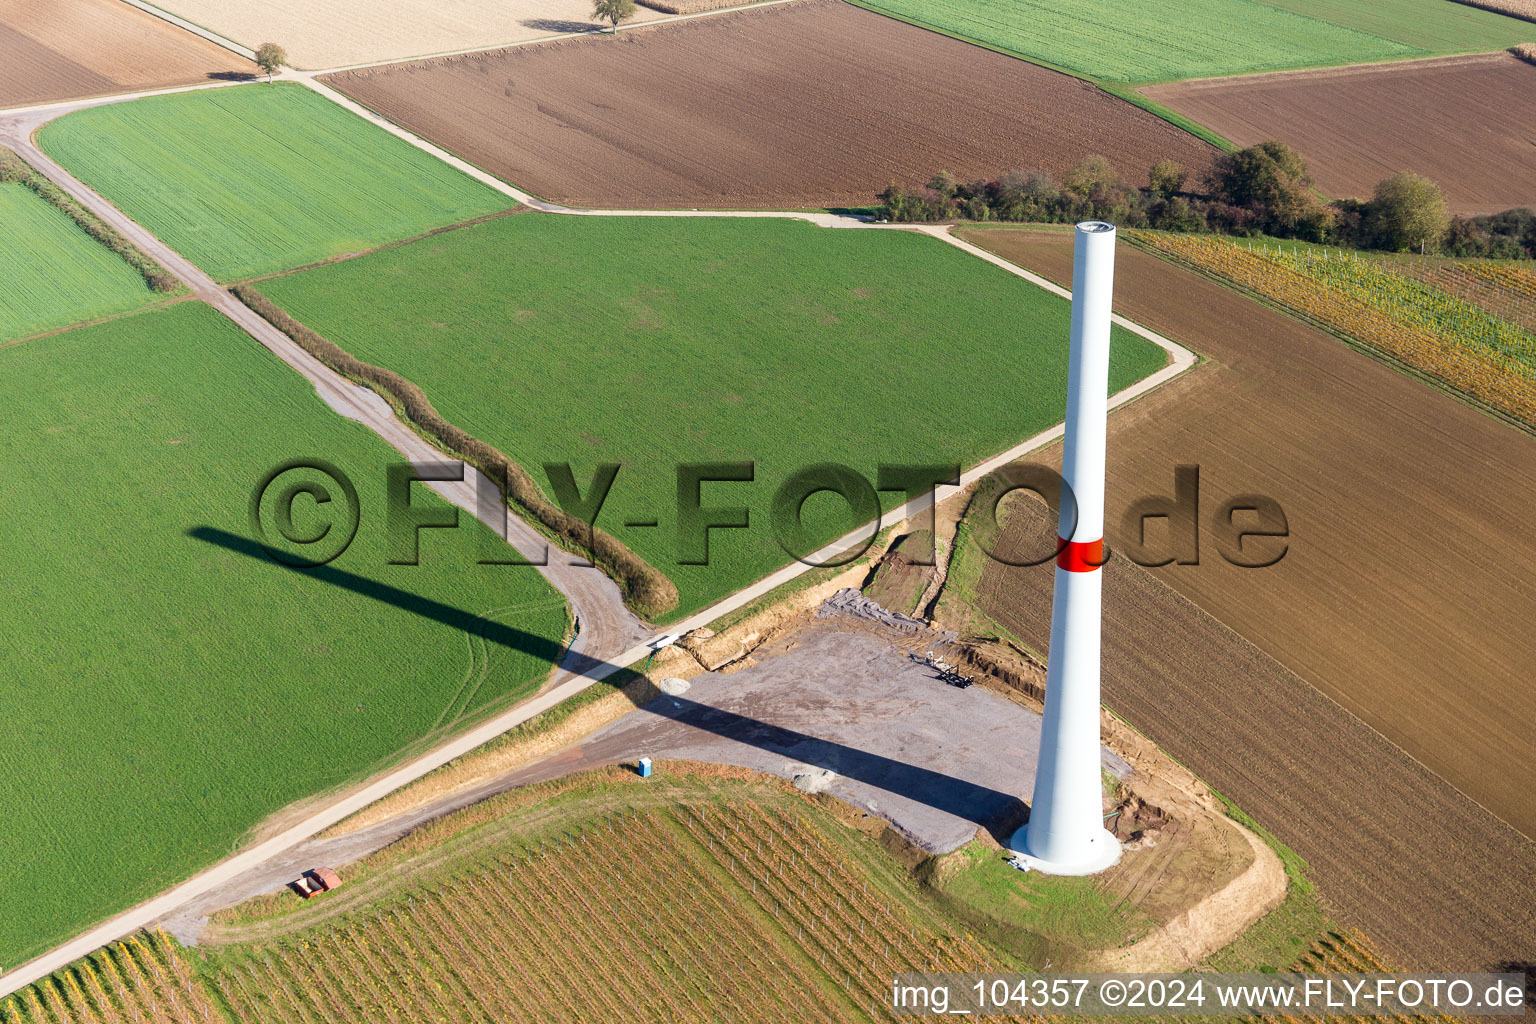 Construction site of the EnBW wind farm Freckenfeld - for a wind turbine with 6 wind turbines in Freckenfeld in the state Rhineland-Palatinate, Germany from above